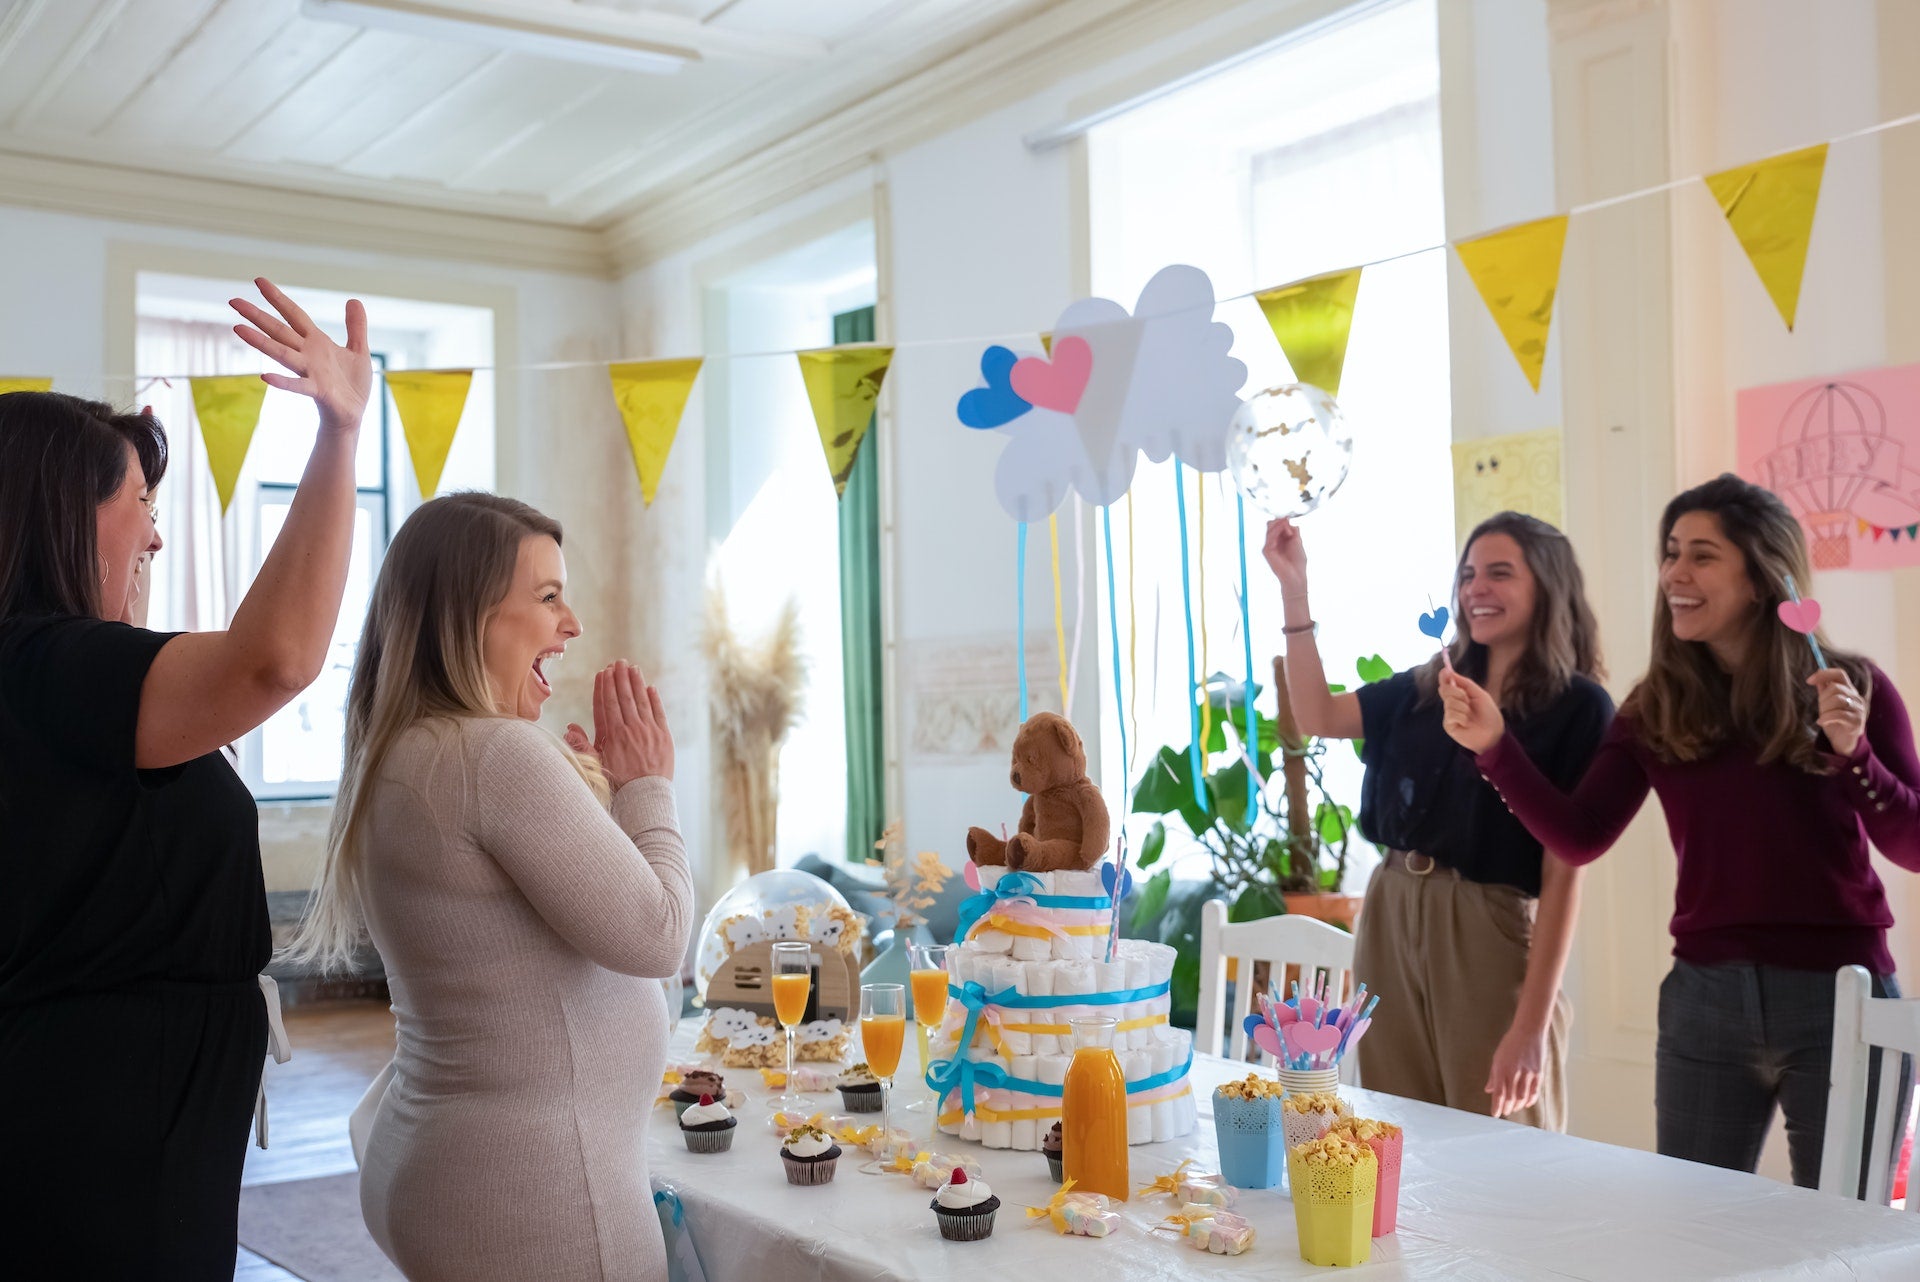 A group of women show excitement around a baby shower decorated table